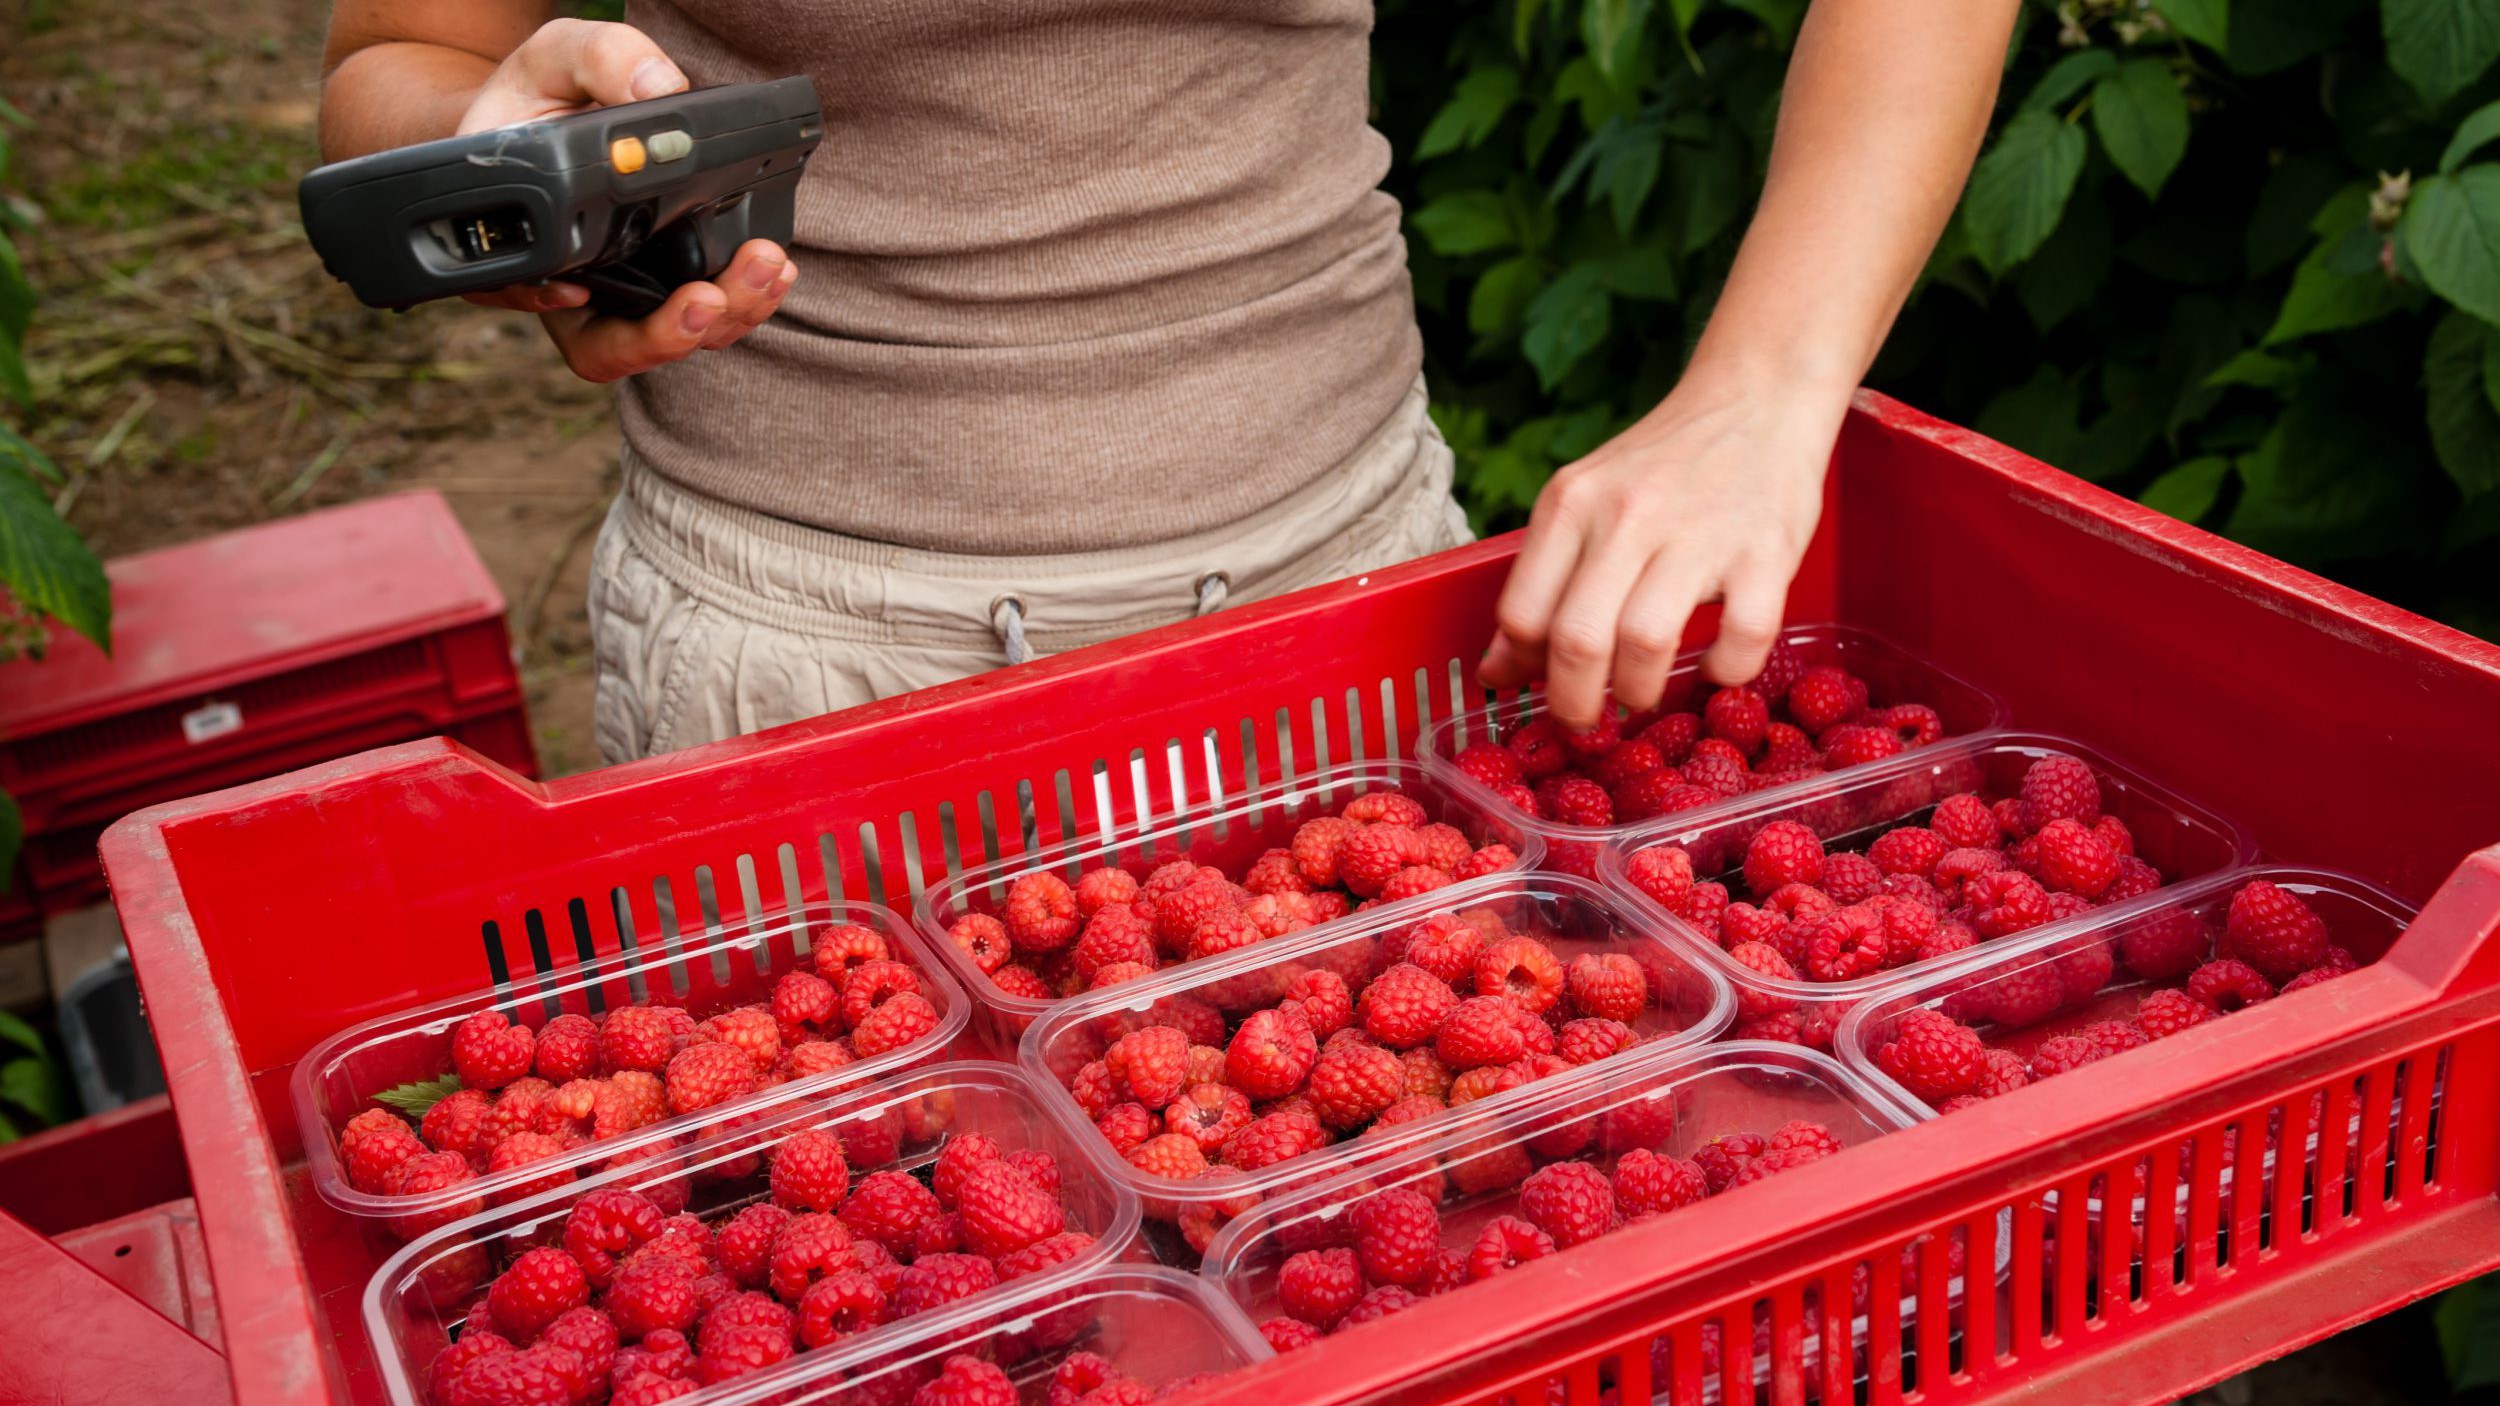 Raspberries harvested and stored in containers under Food Safety and Sanitation